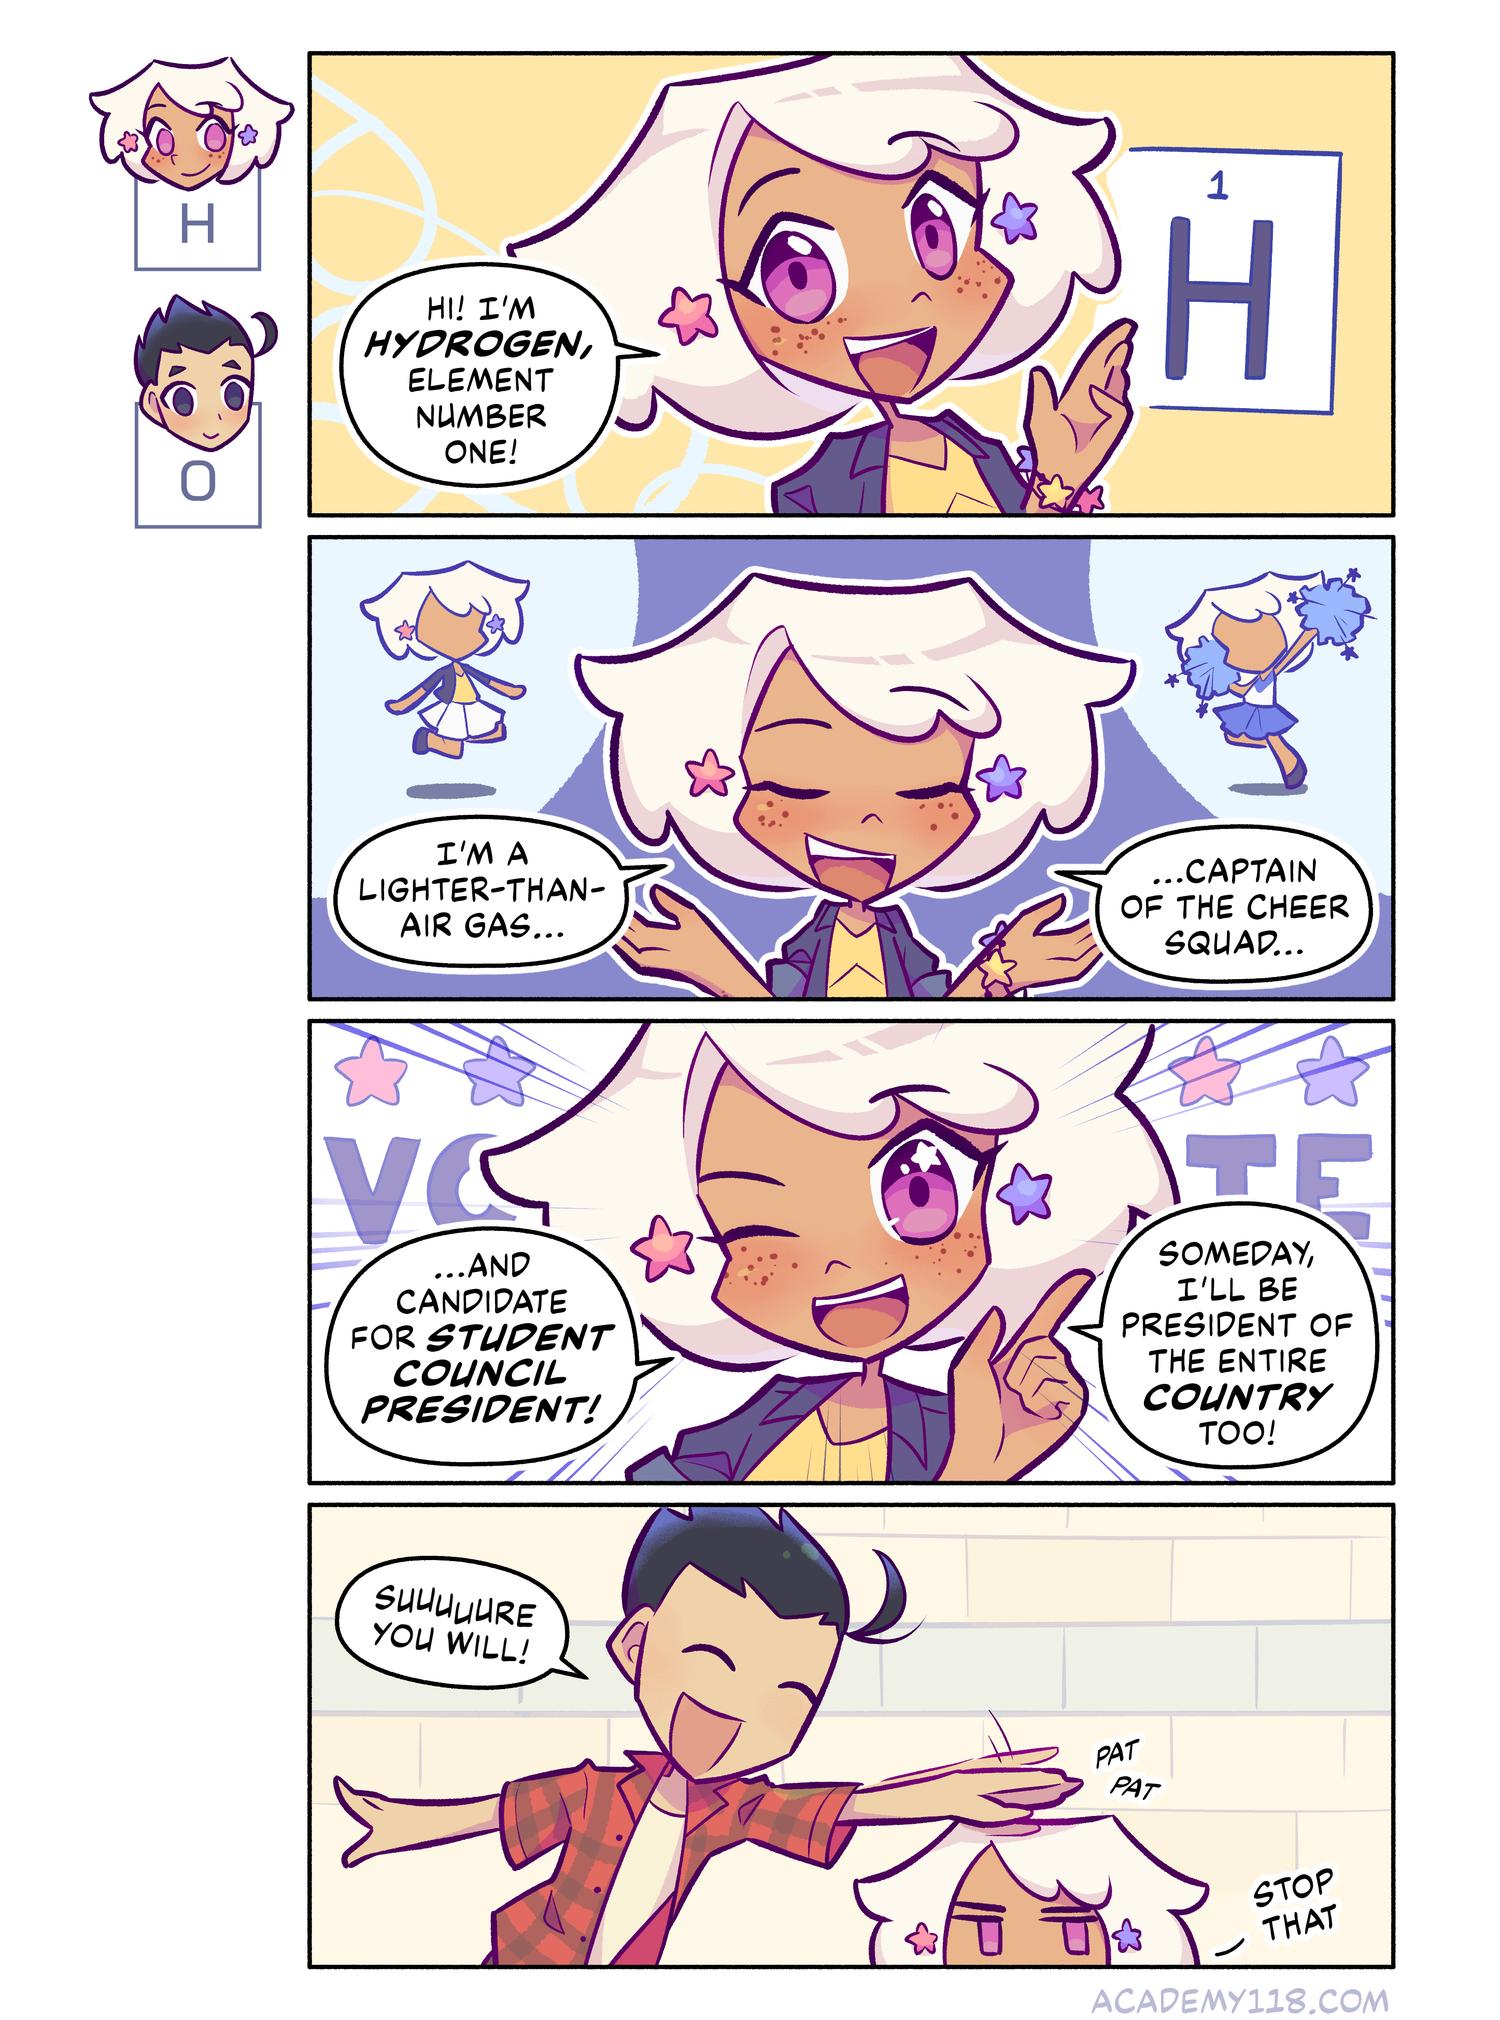 Hydrogen for President comic page 2